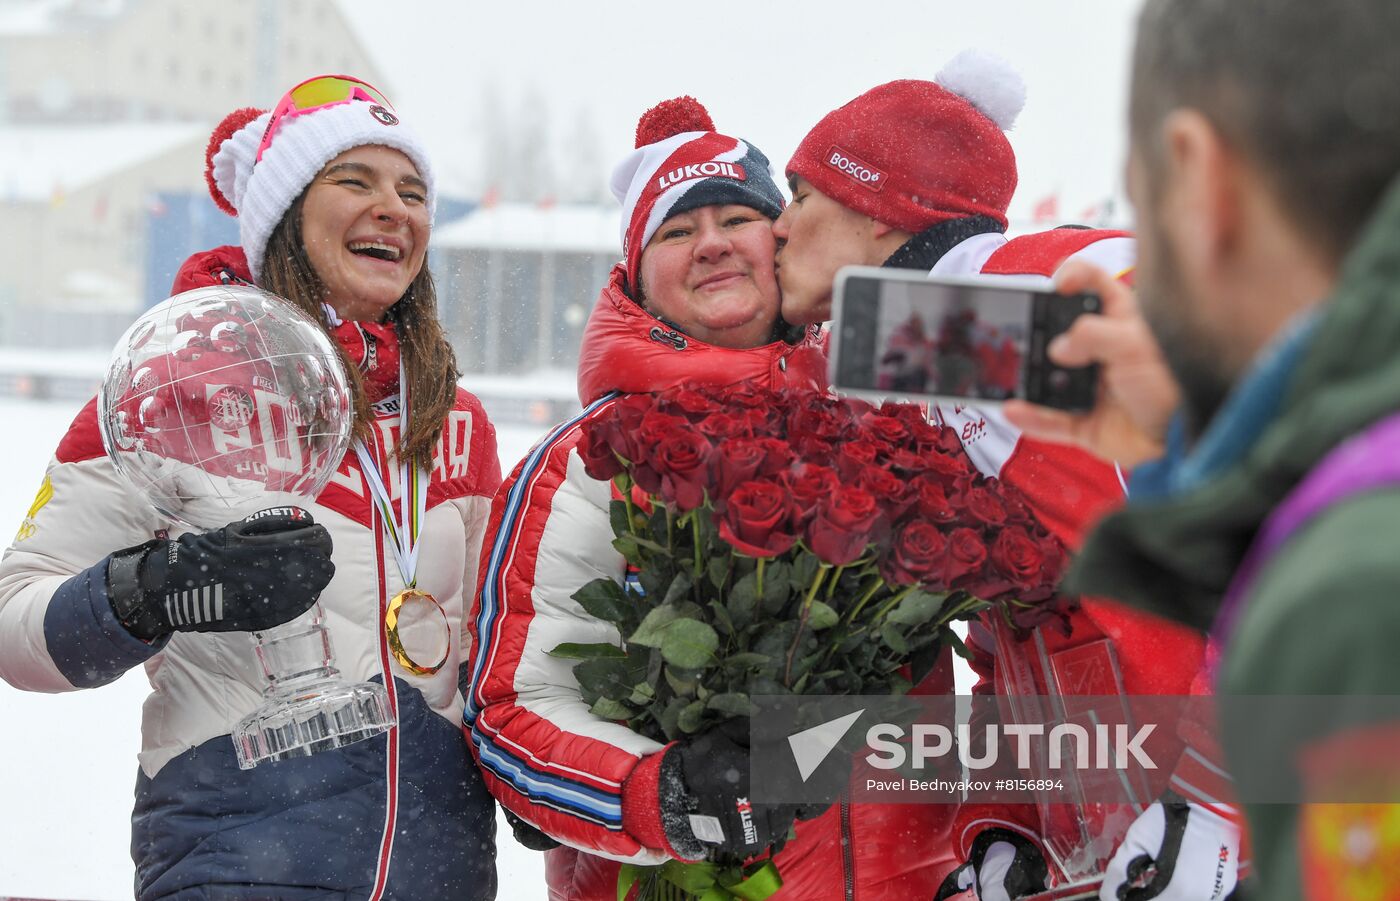 Russia FIS Cross-Country Skiing World Cup Awarding